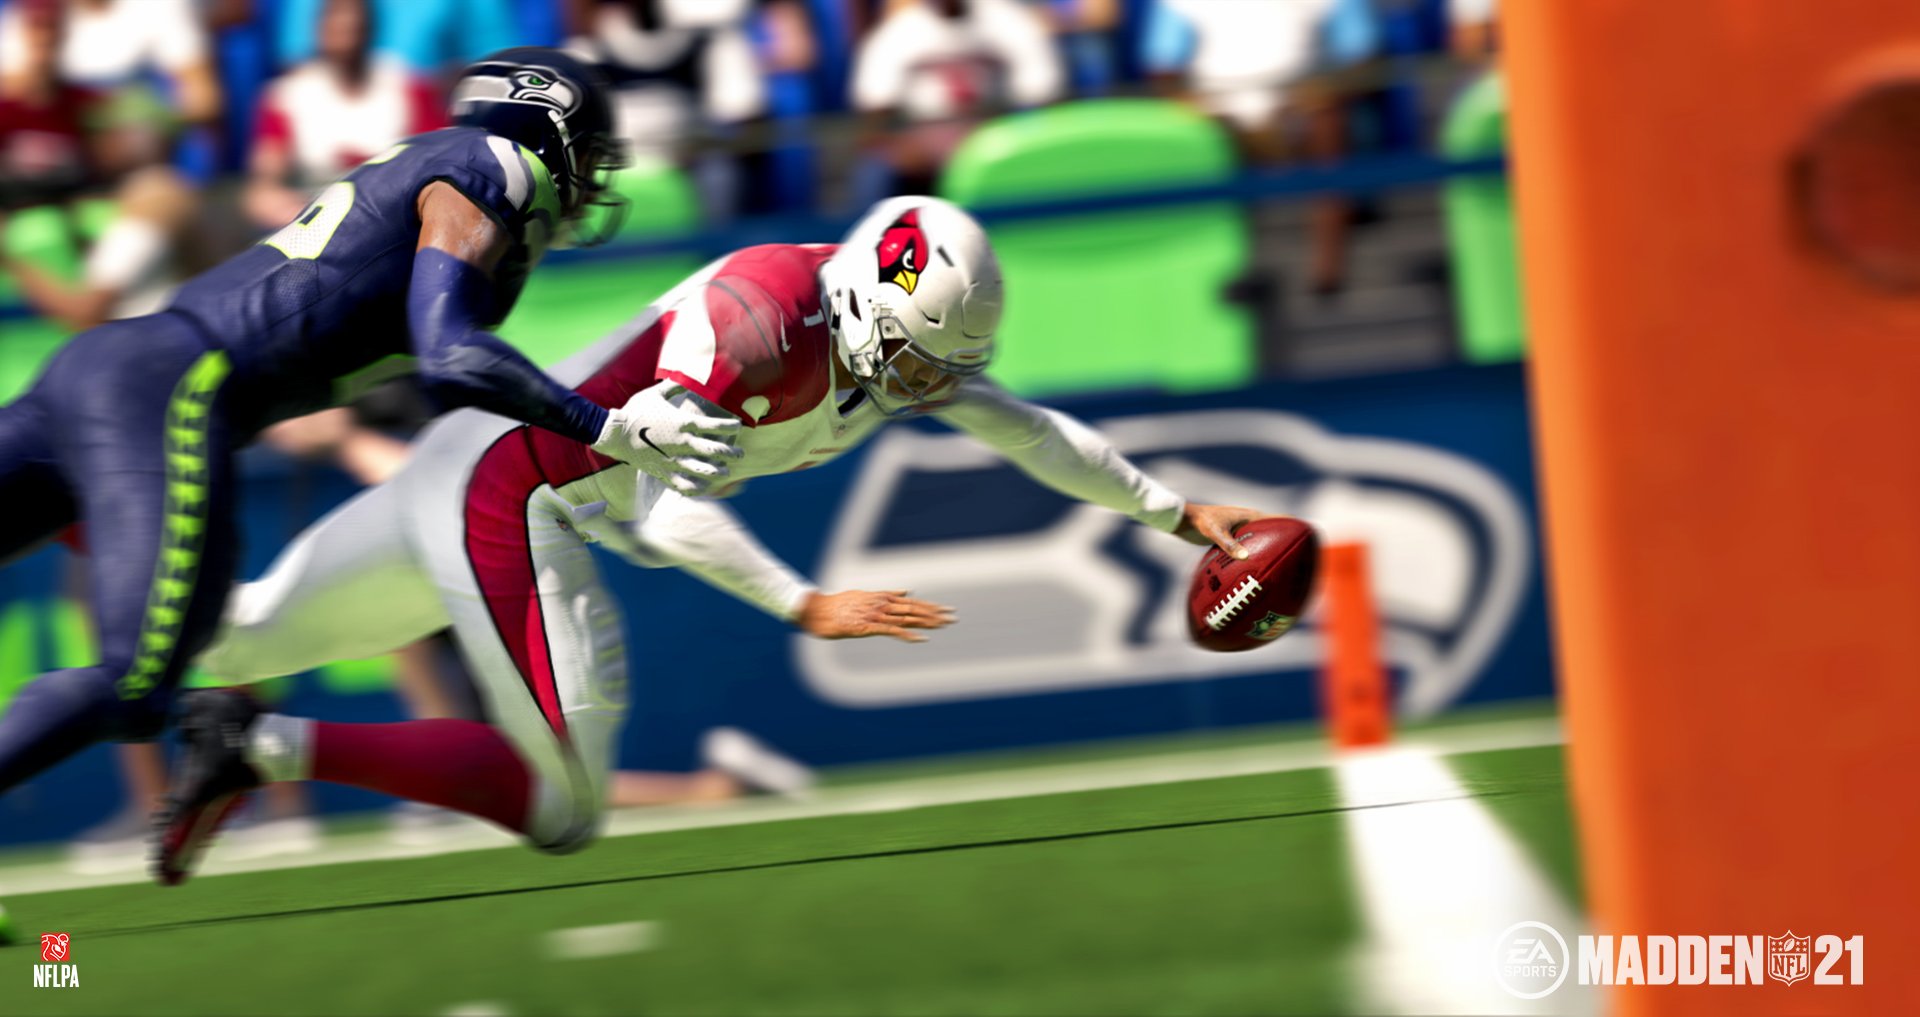  How to pre-order Madden 21 – Versions, bonuses, release date 